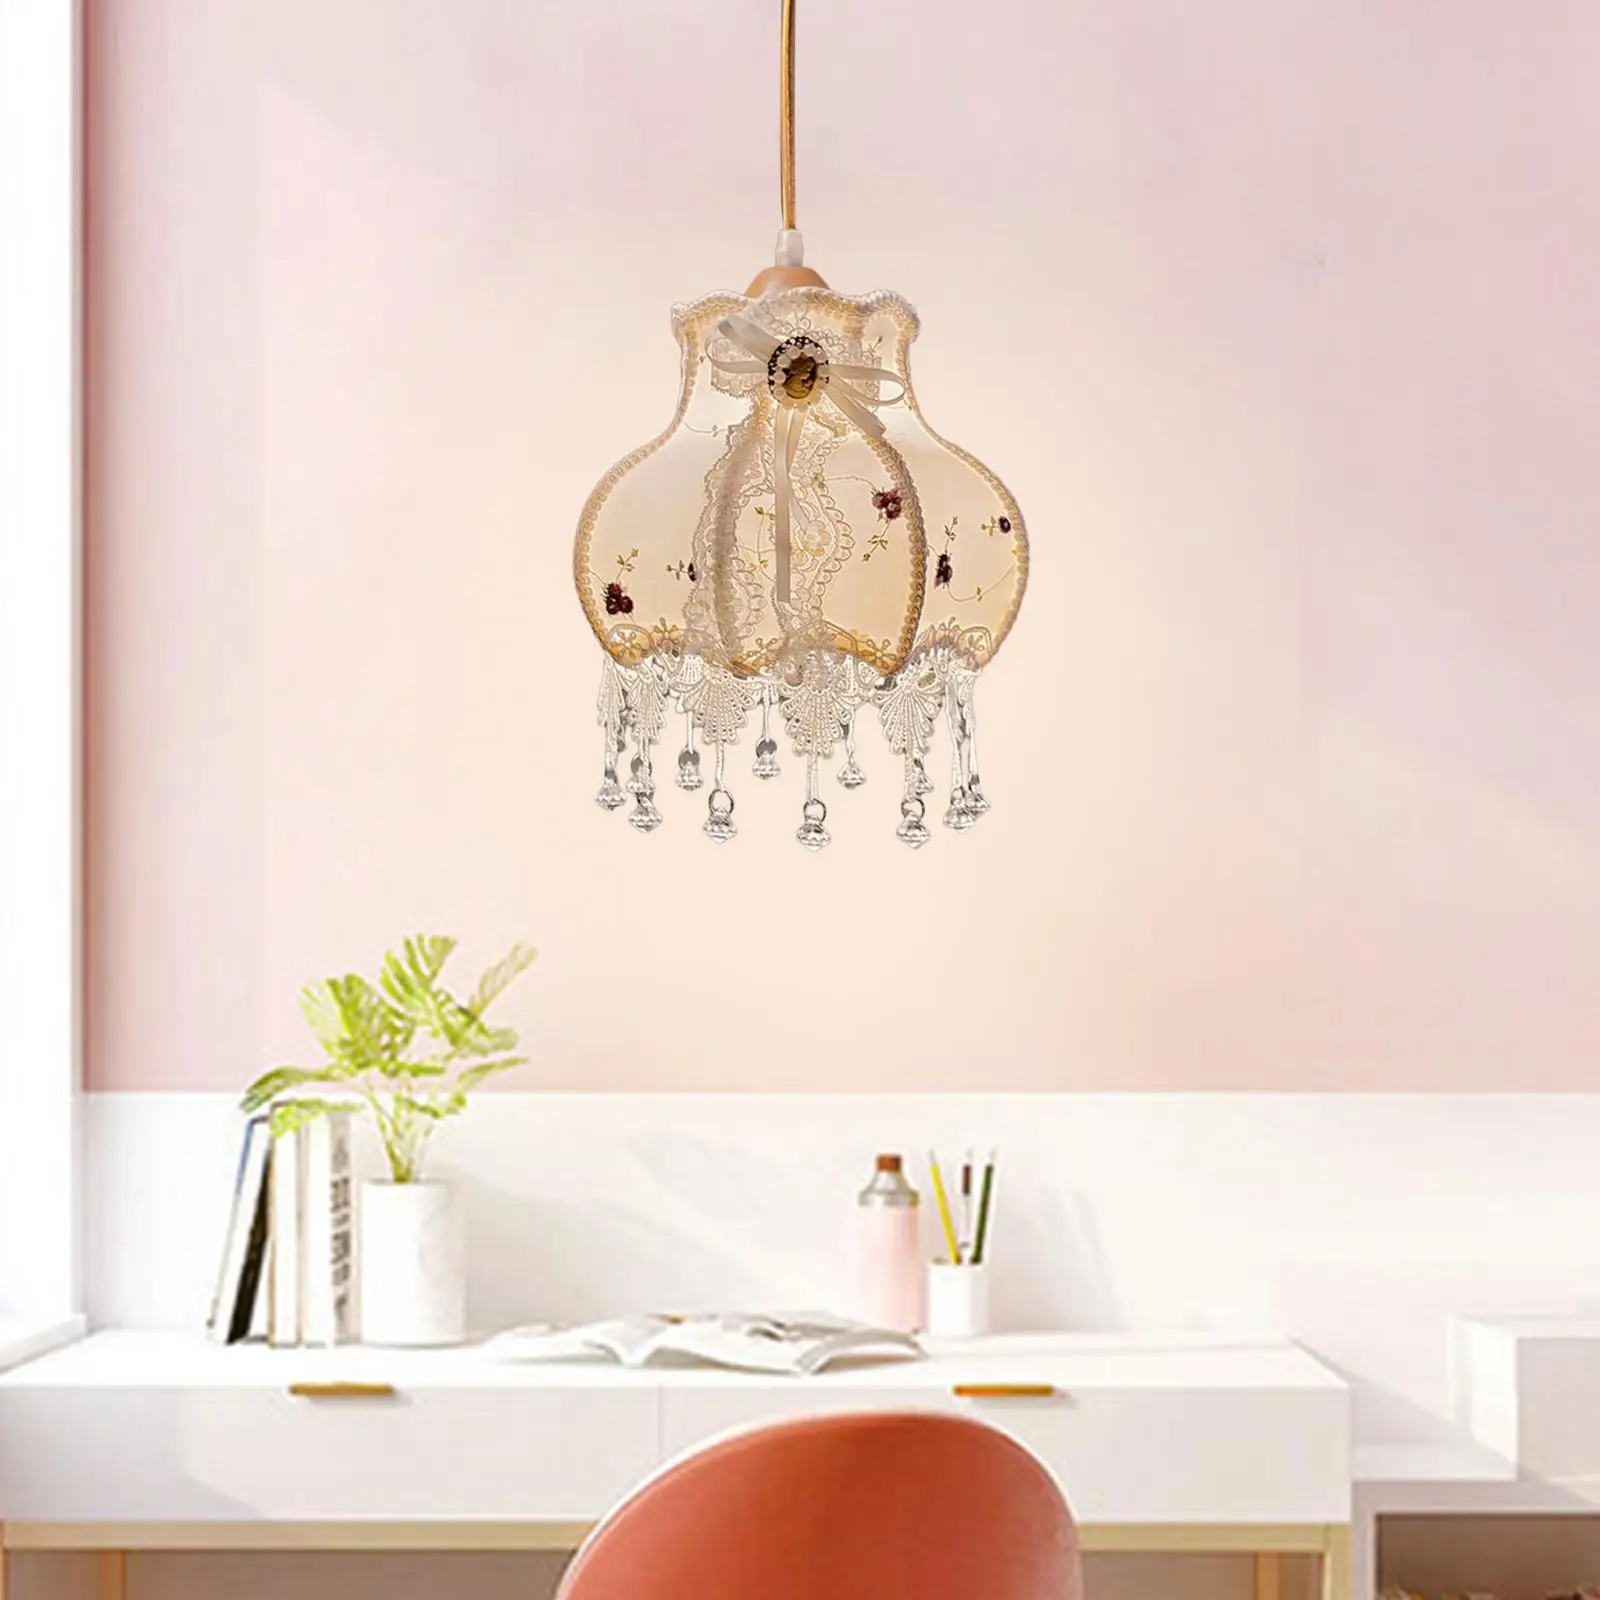 Hanging Pendant Light Shade Lampshade E27 Fabric Dome Lamp Shade for Living Room Bedroom Home Dining Room Hotel